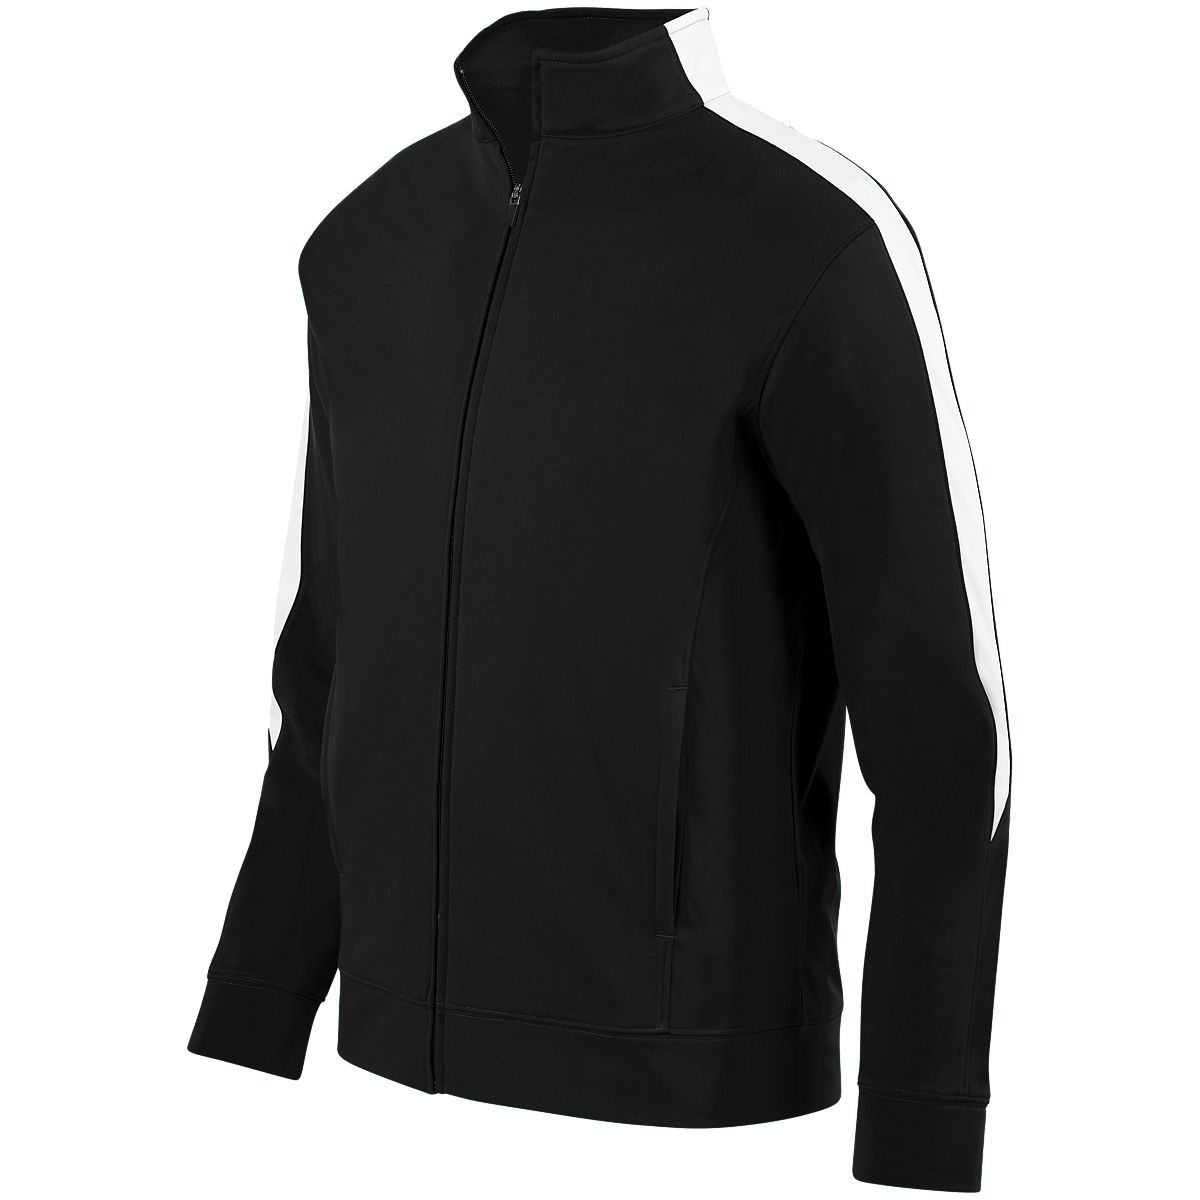 Augusta Sportswear Medalist Jacket 2.0 in Black/White  -Part of the Adult, Adult-Jacket, Augusta-Products, Outerwear product lines at KanaleyCreations.com